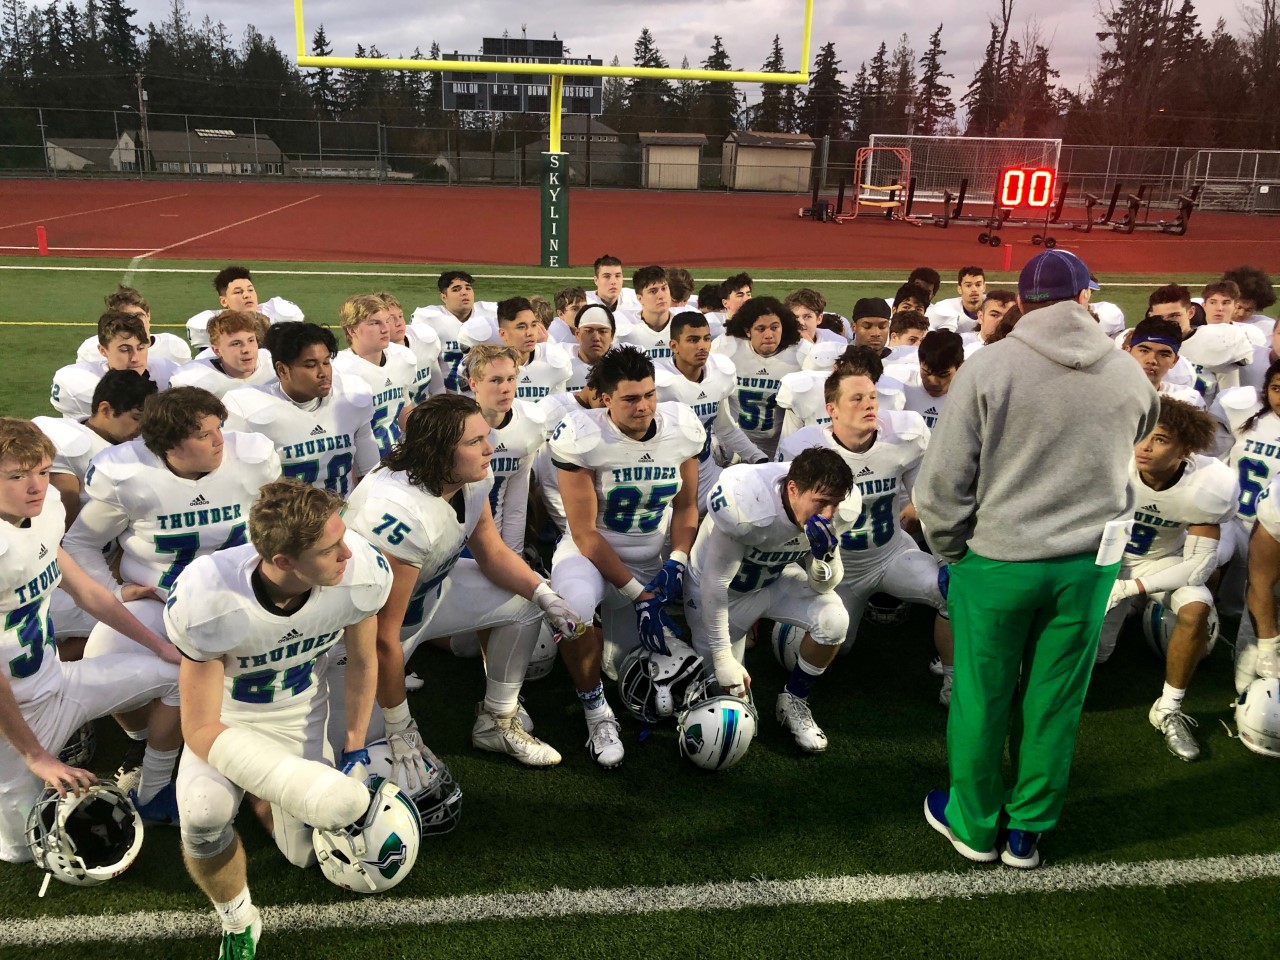 Mountain View head coach Adam Mathieson addresses his team moments after a 24-7 loss to O'Dea in the 3A state semifinals at Skyline High School on Saturday, Nov. 24, 2018.